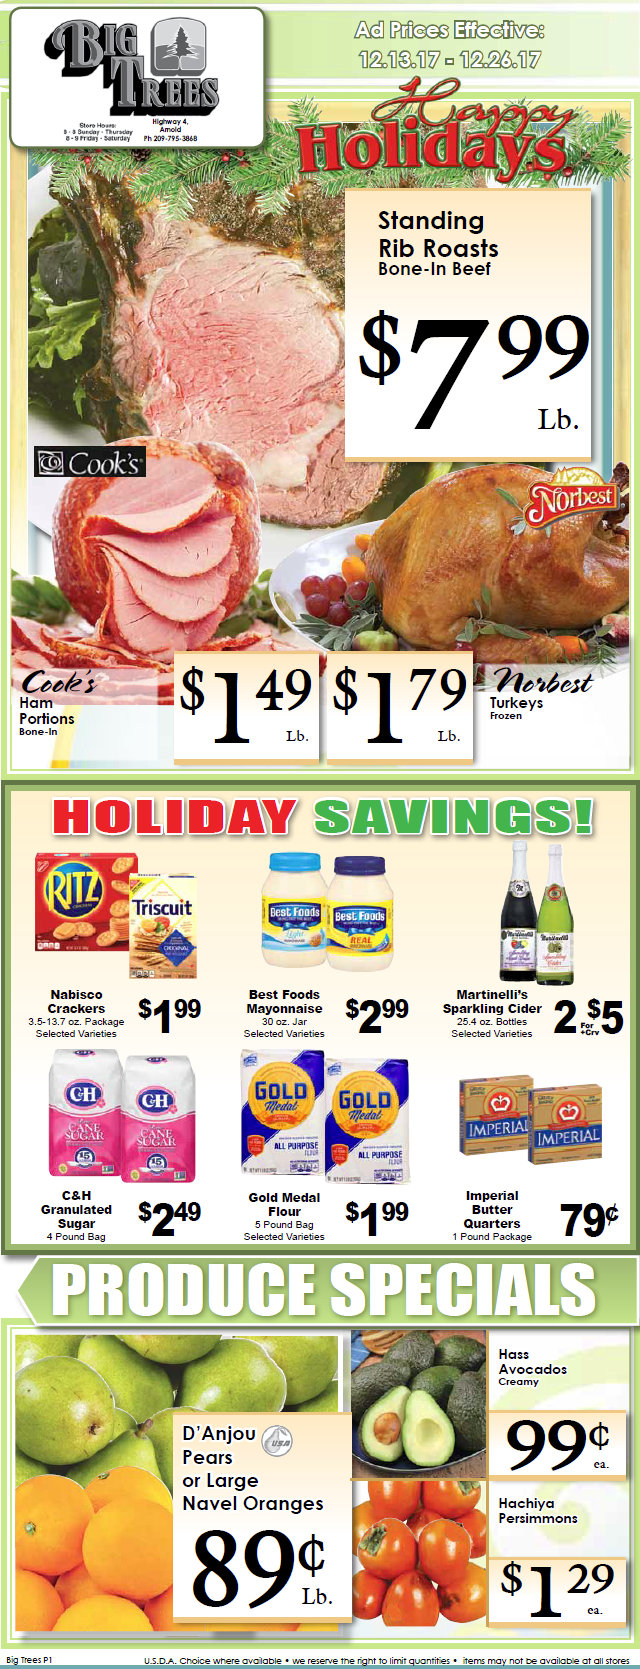 Big Trees Market Weekly Ad & Grocery Specials December 13 – 26th!  The Big Holiday Ad!!!